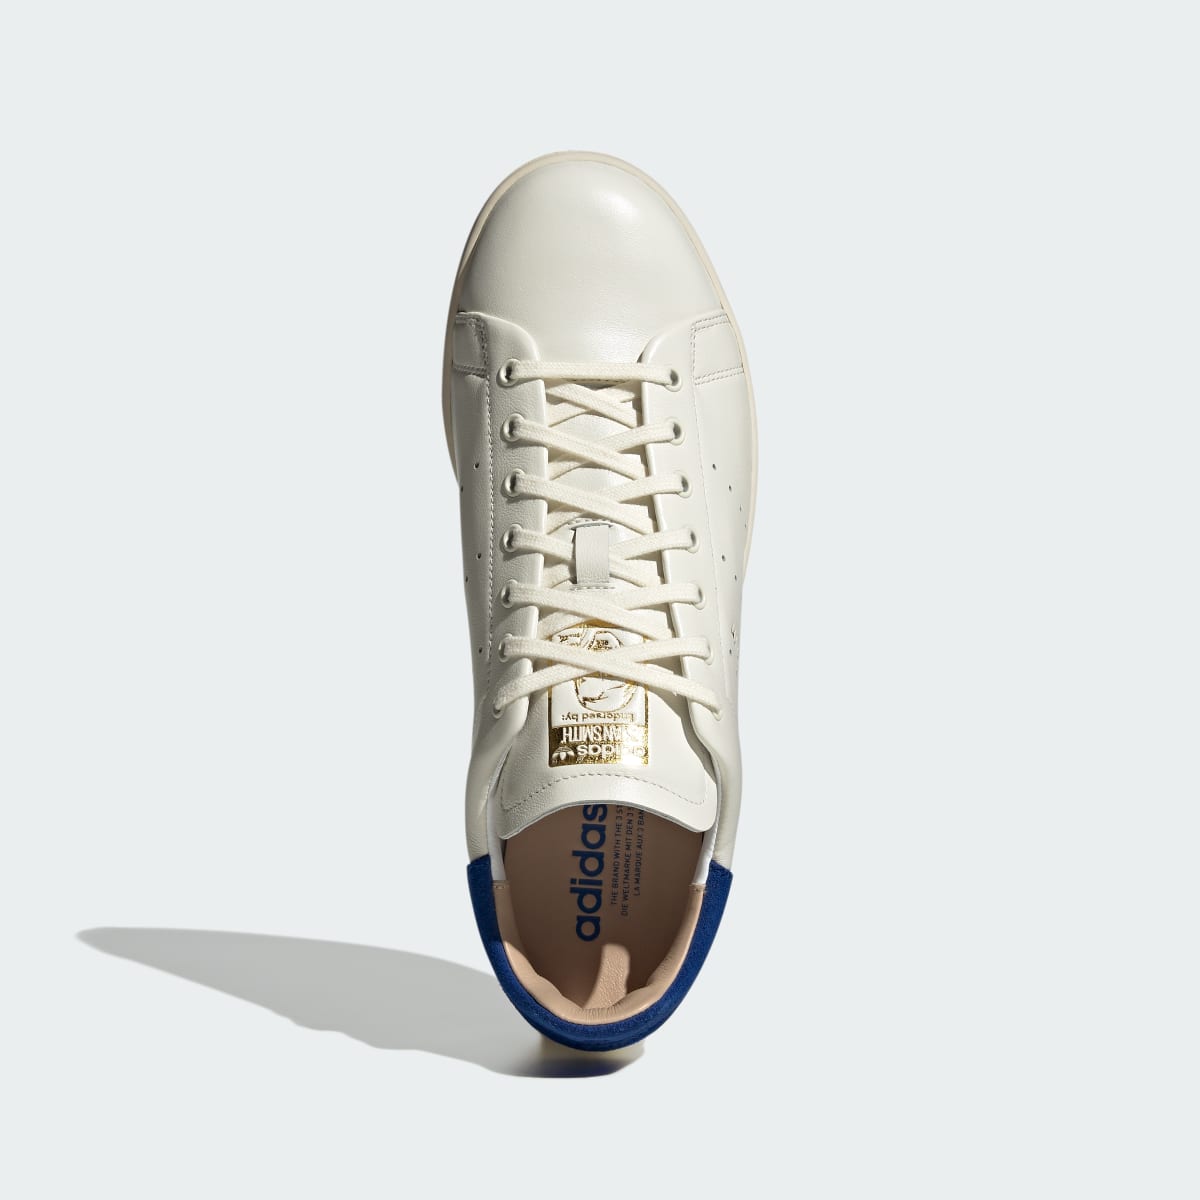 Adidas Chaussure Stan Smith Lux. 4